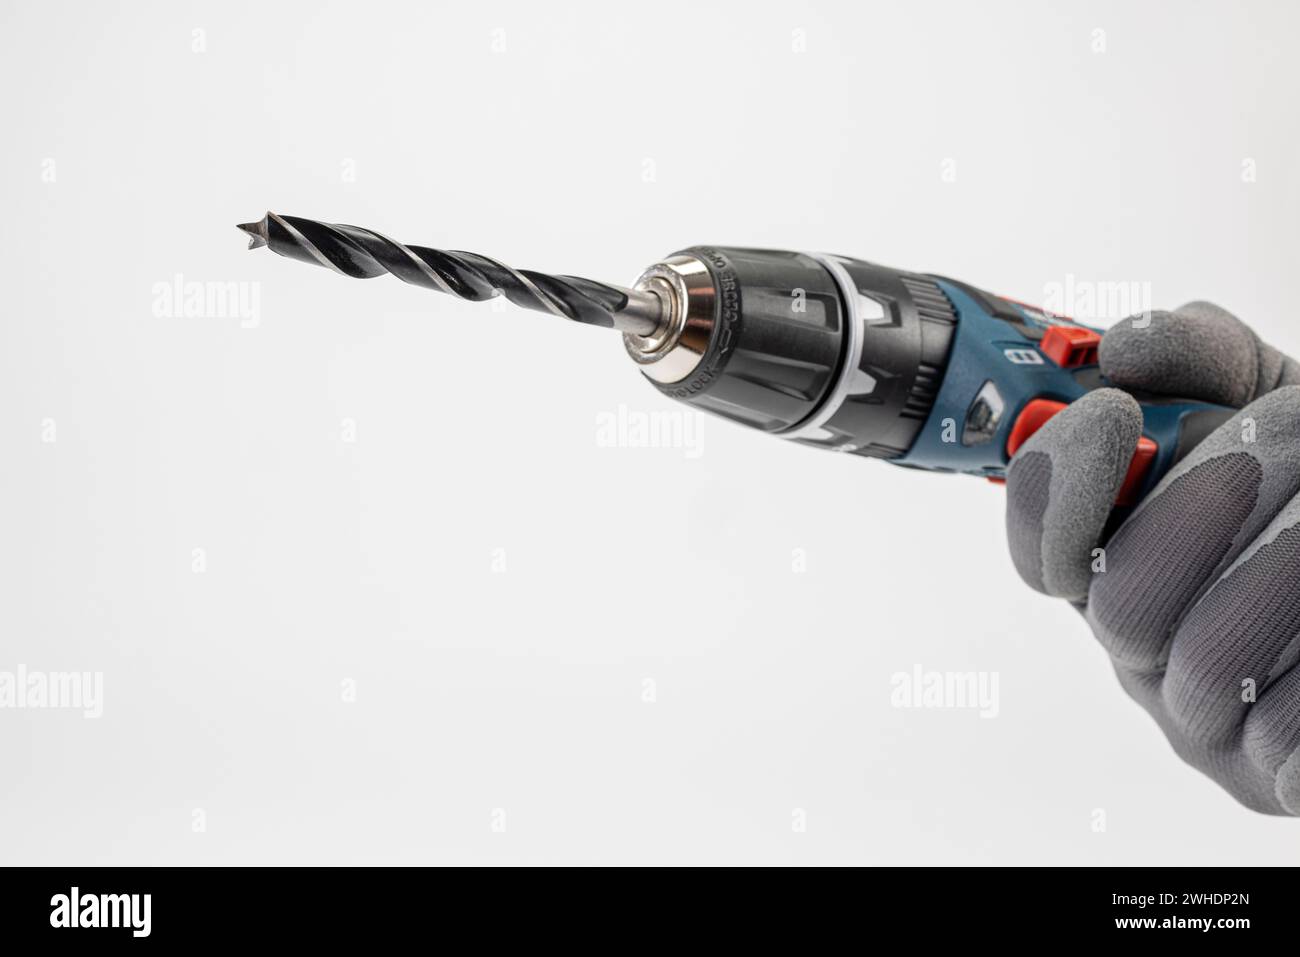 Man's hand with work glove holding Bosch cordless drill, with inserted wood drill, white background, Stock Photo